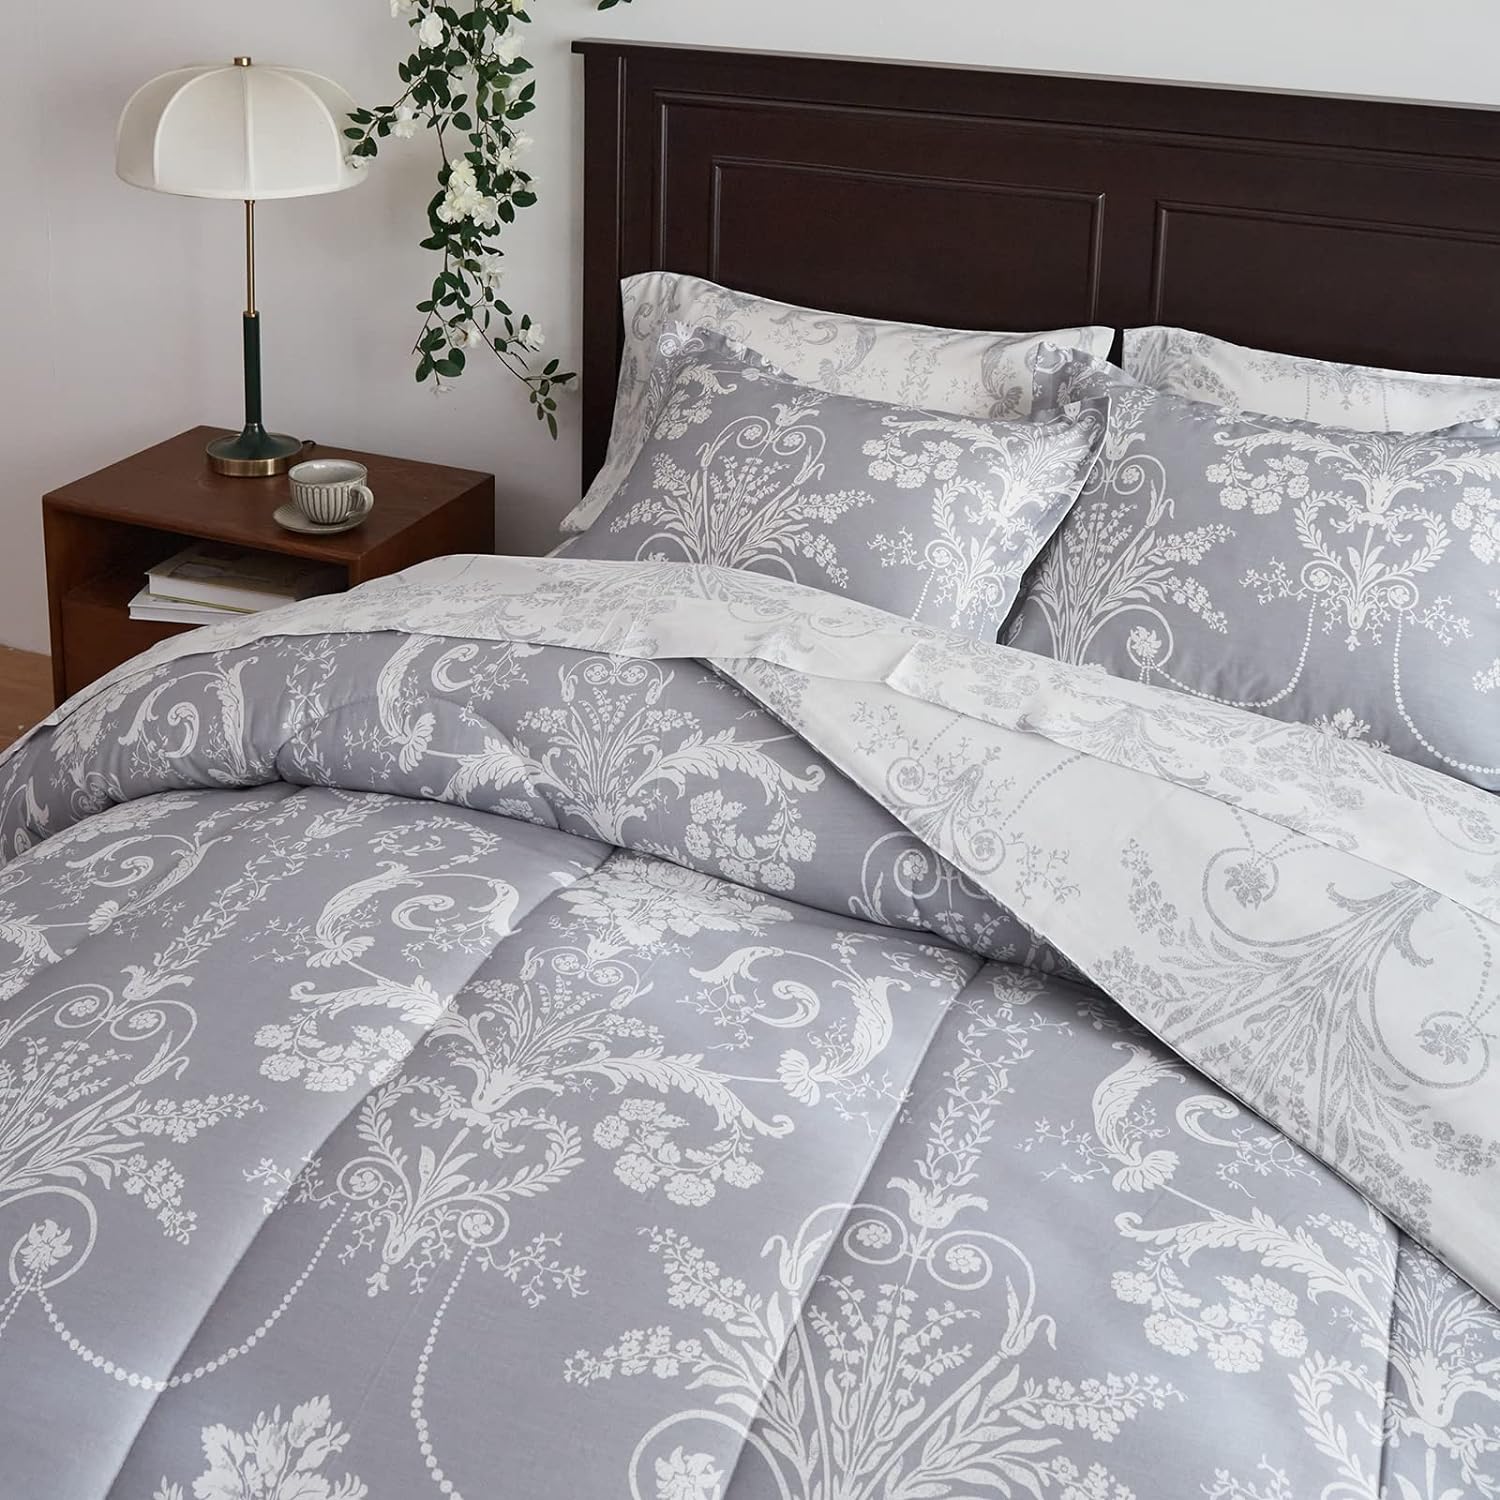 Great Choice Products Gray Cotton Bed In A Bag 7 Pieces Queen Size Floral Comforter Sheet Set White Flowers Leaves Bedding Set (1 Comforter 2 …